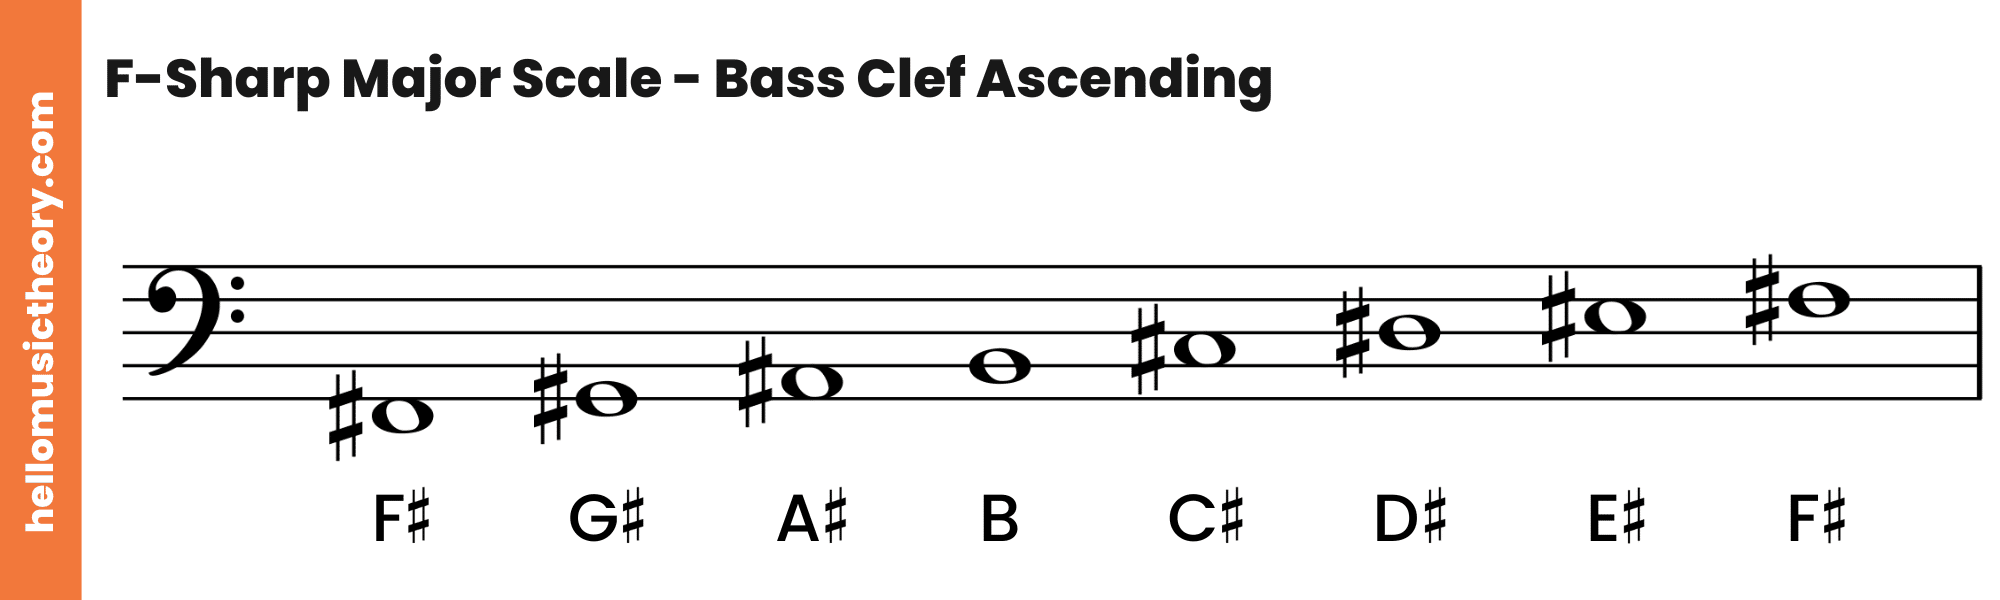 F-Sharp Major Scale Bass Clef Ascending